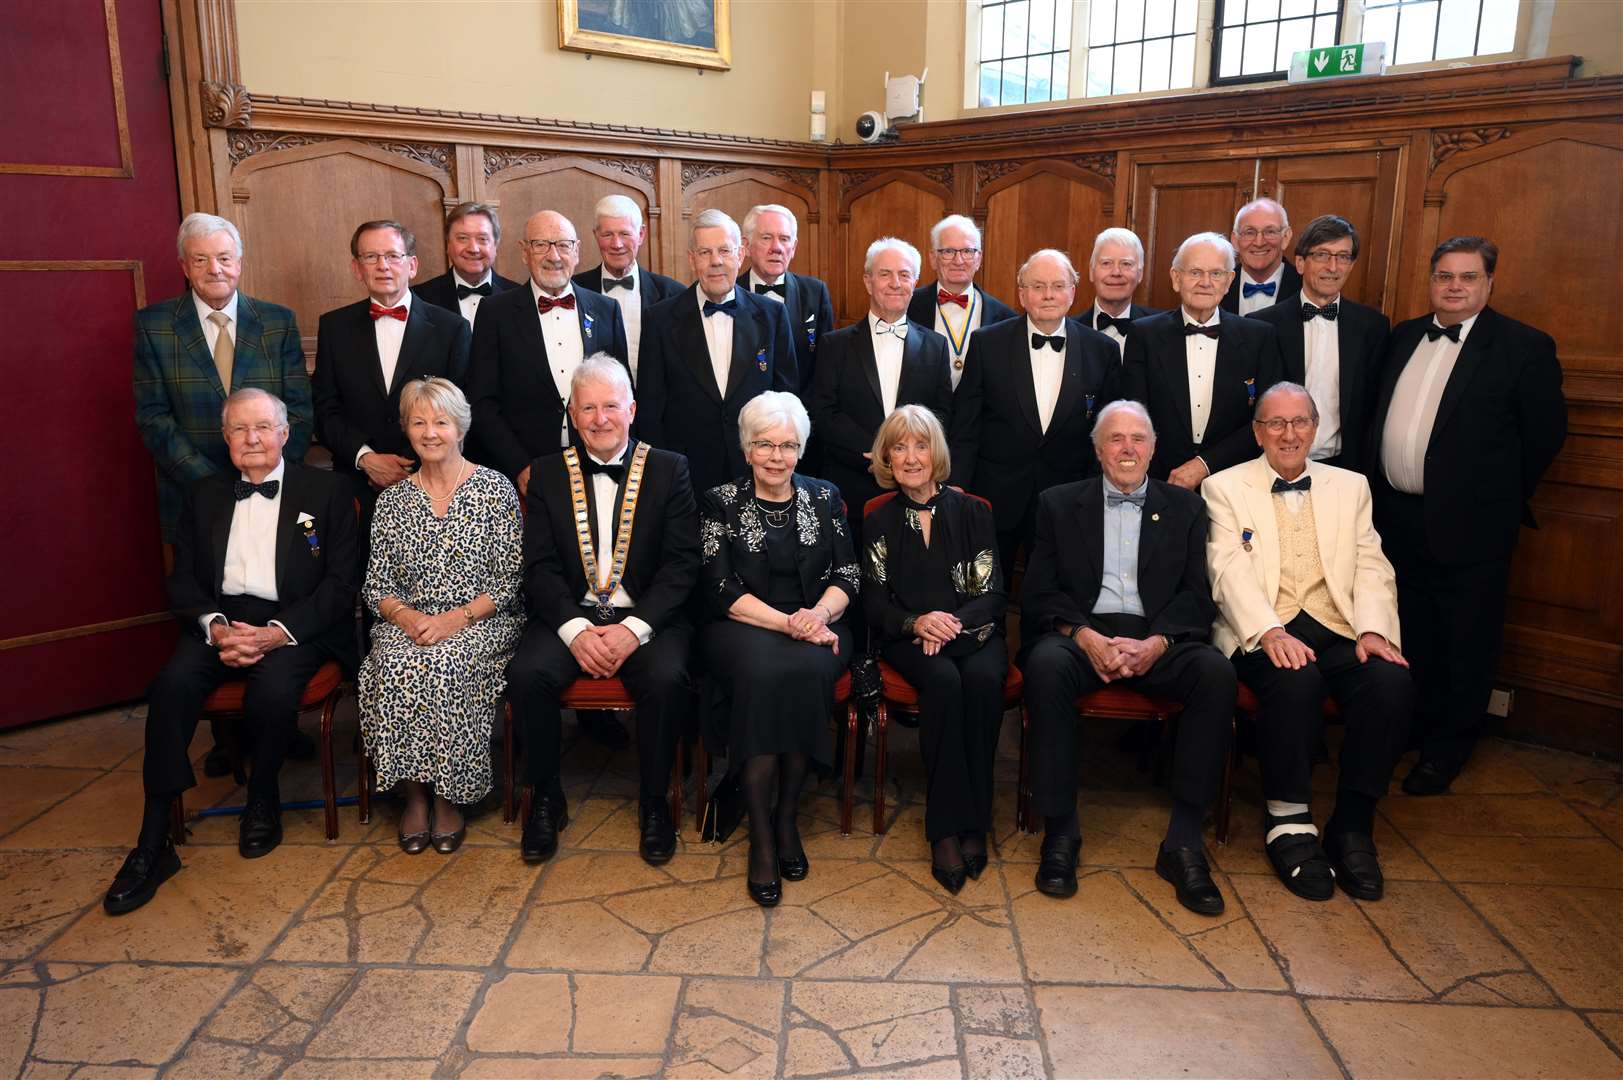 The 50th anniversary was celebrated with a special evening dinner